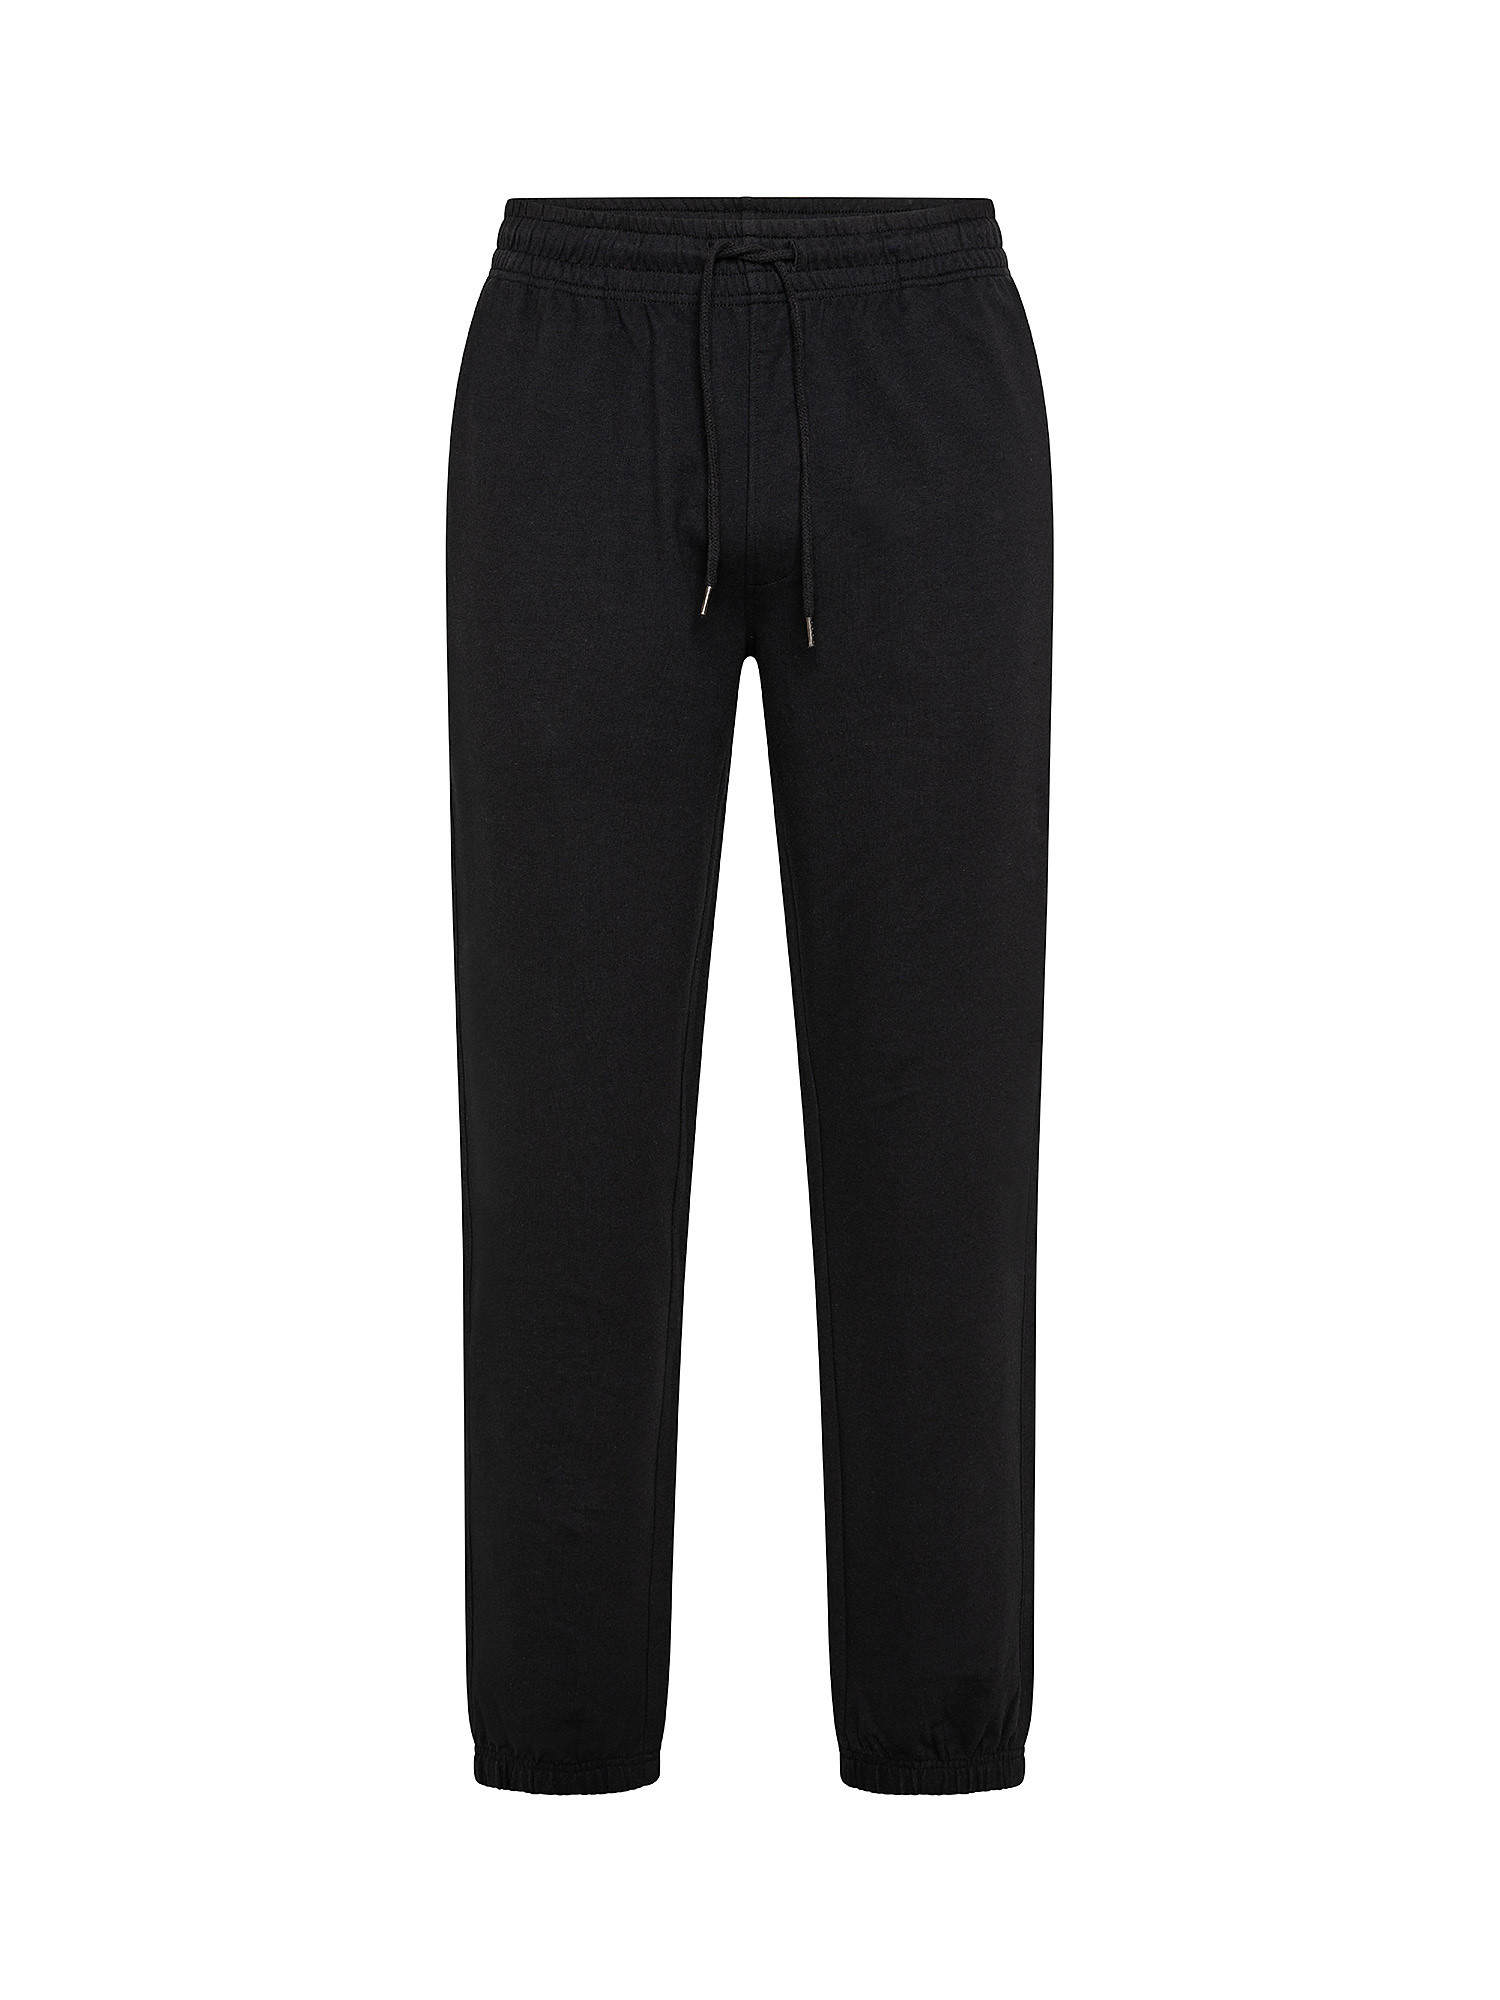 Fleece trousers, Anthracite, large image number 0